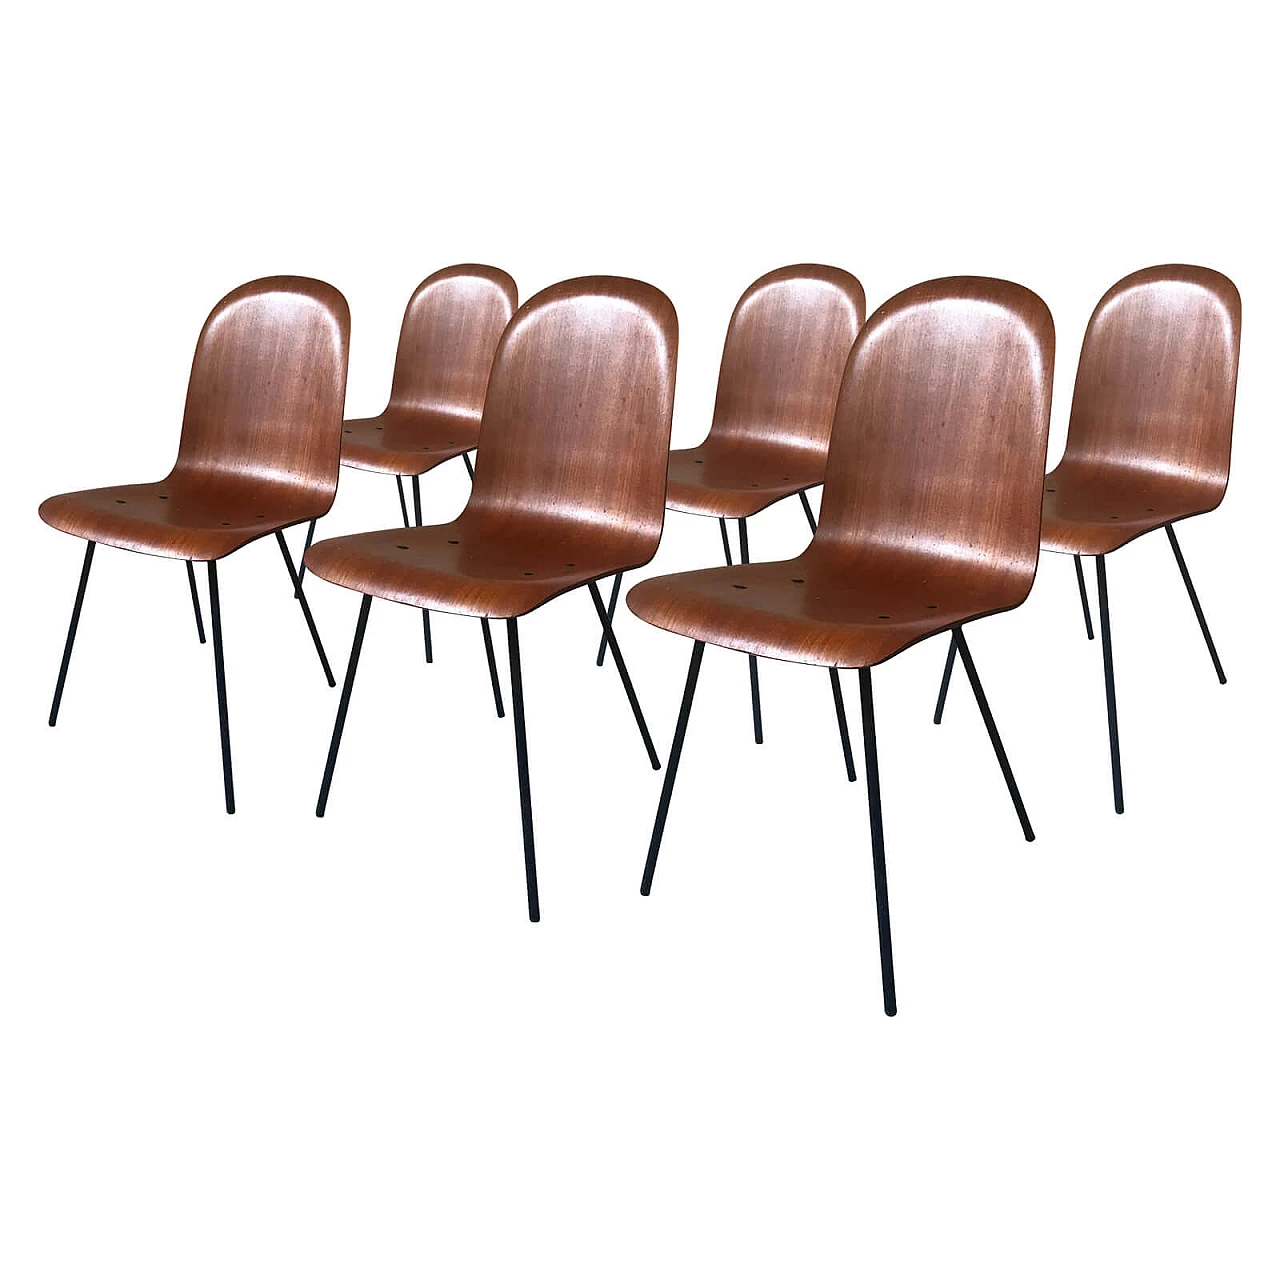 6 chairs by Carlo Ratti, 1950s 1072414